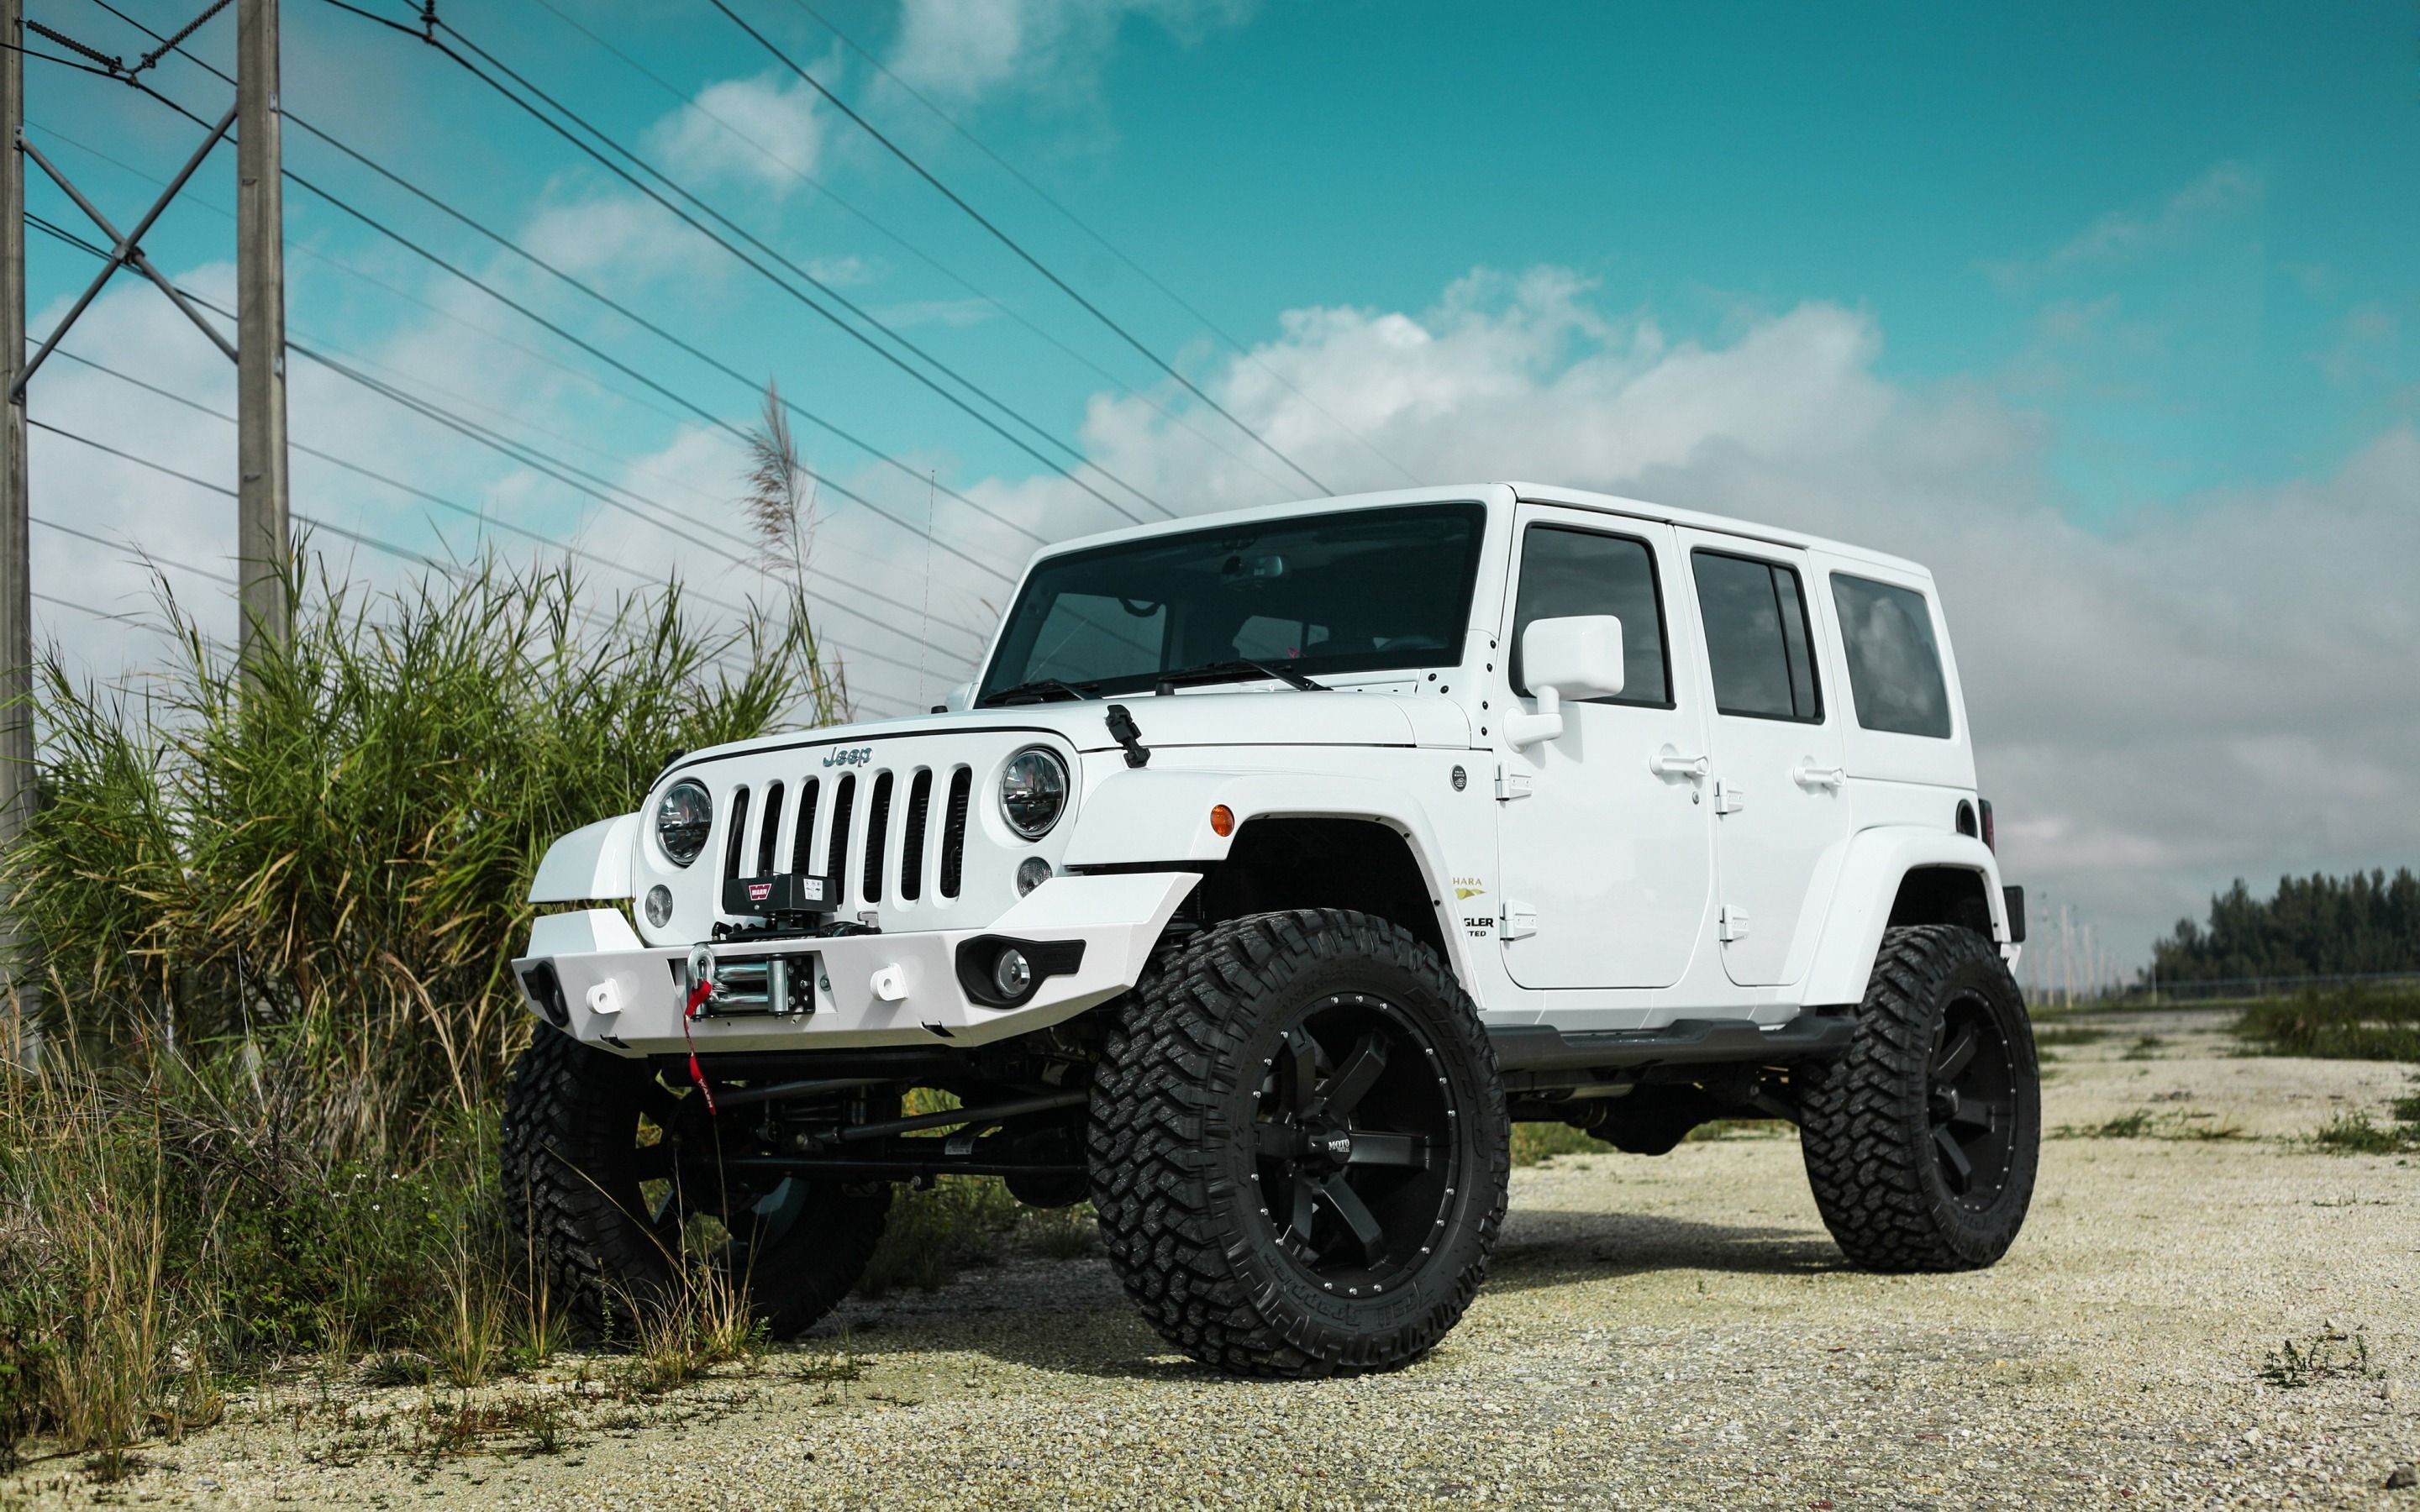 Download wallpapers Jeep Wrangler, American SUV, tuning, White Jeep